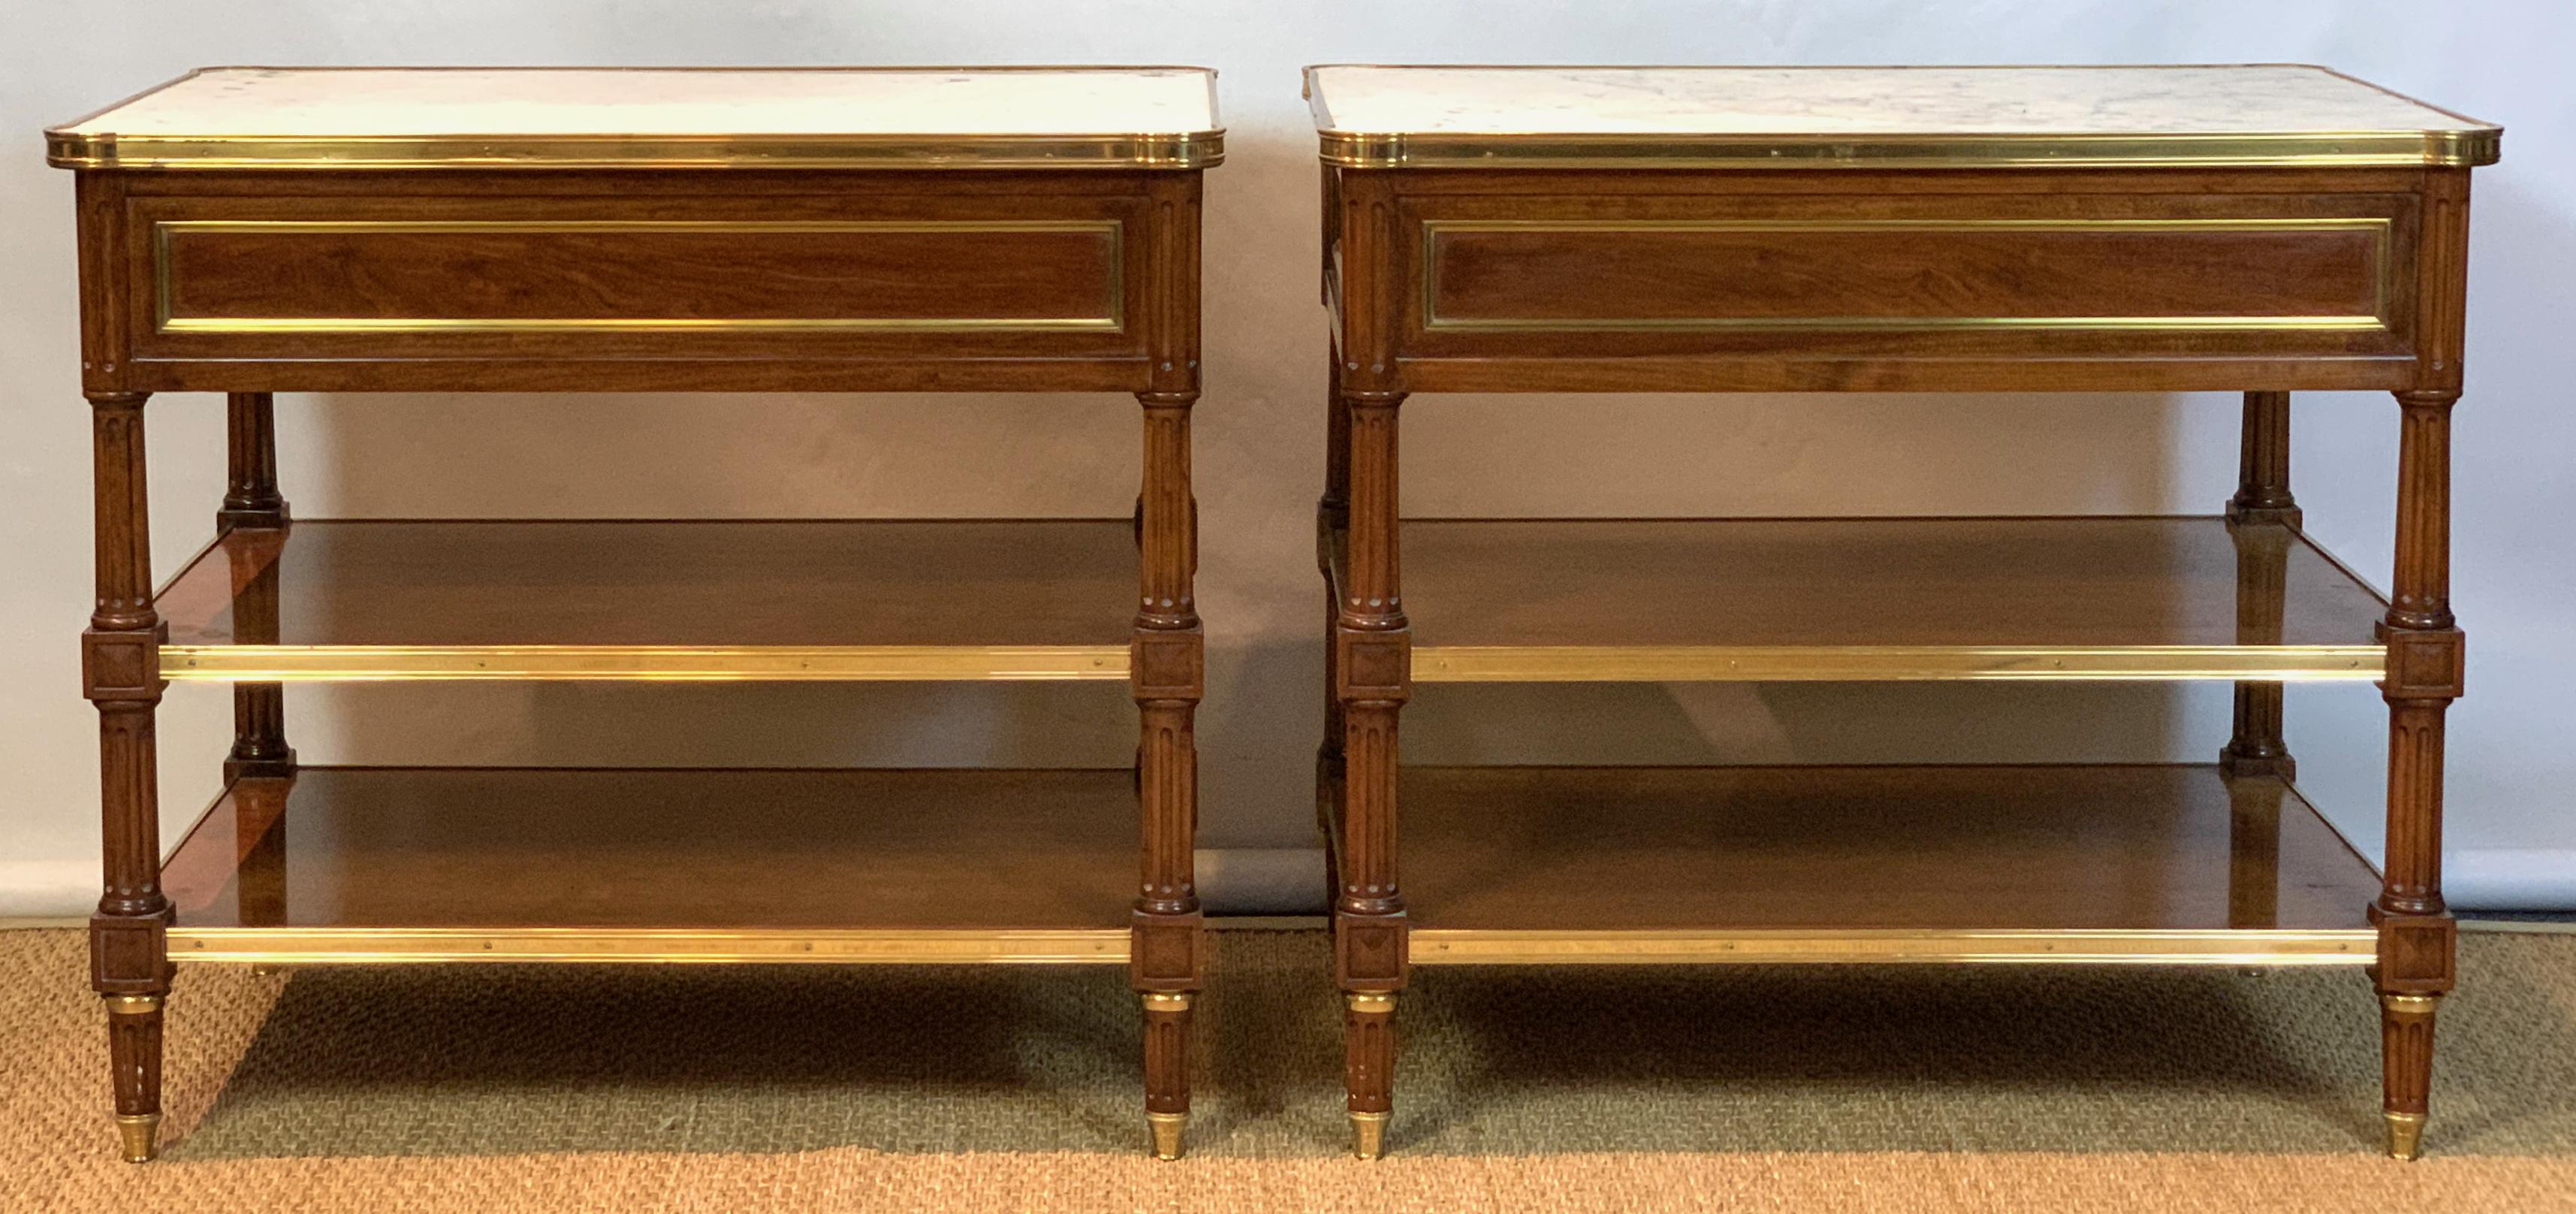 Hand-Crafted Pair of Louis XVI Style Side Tables